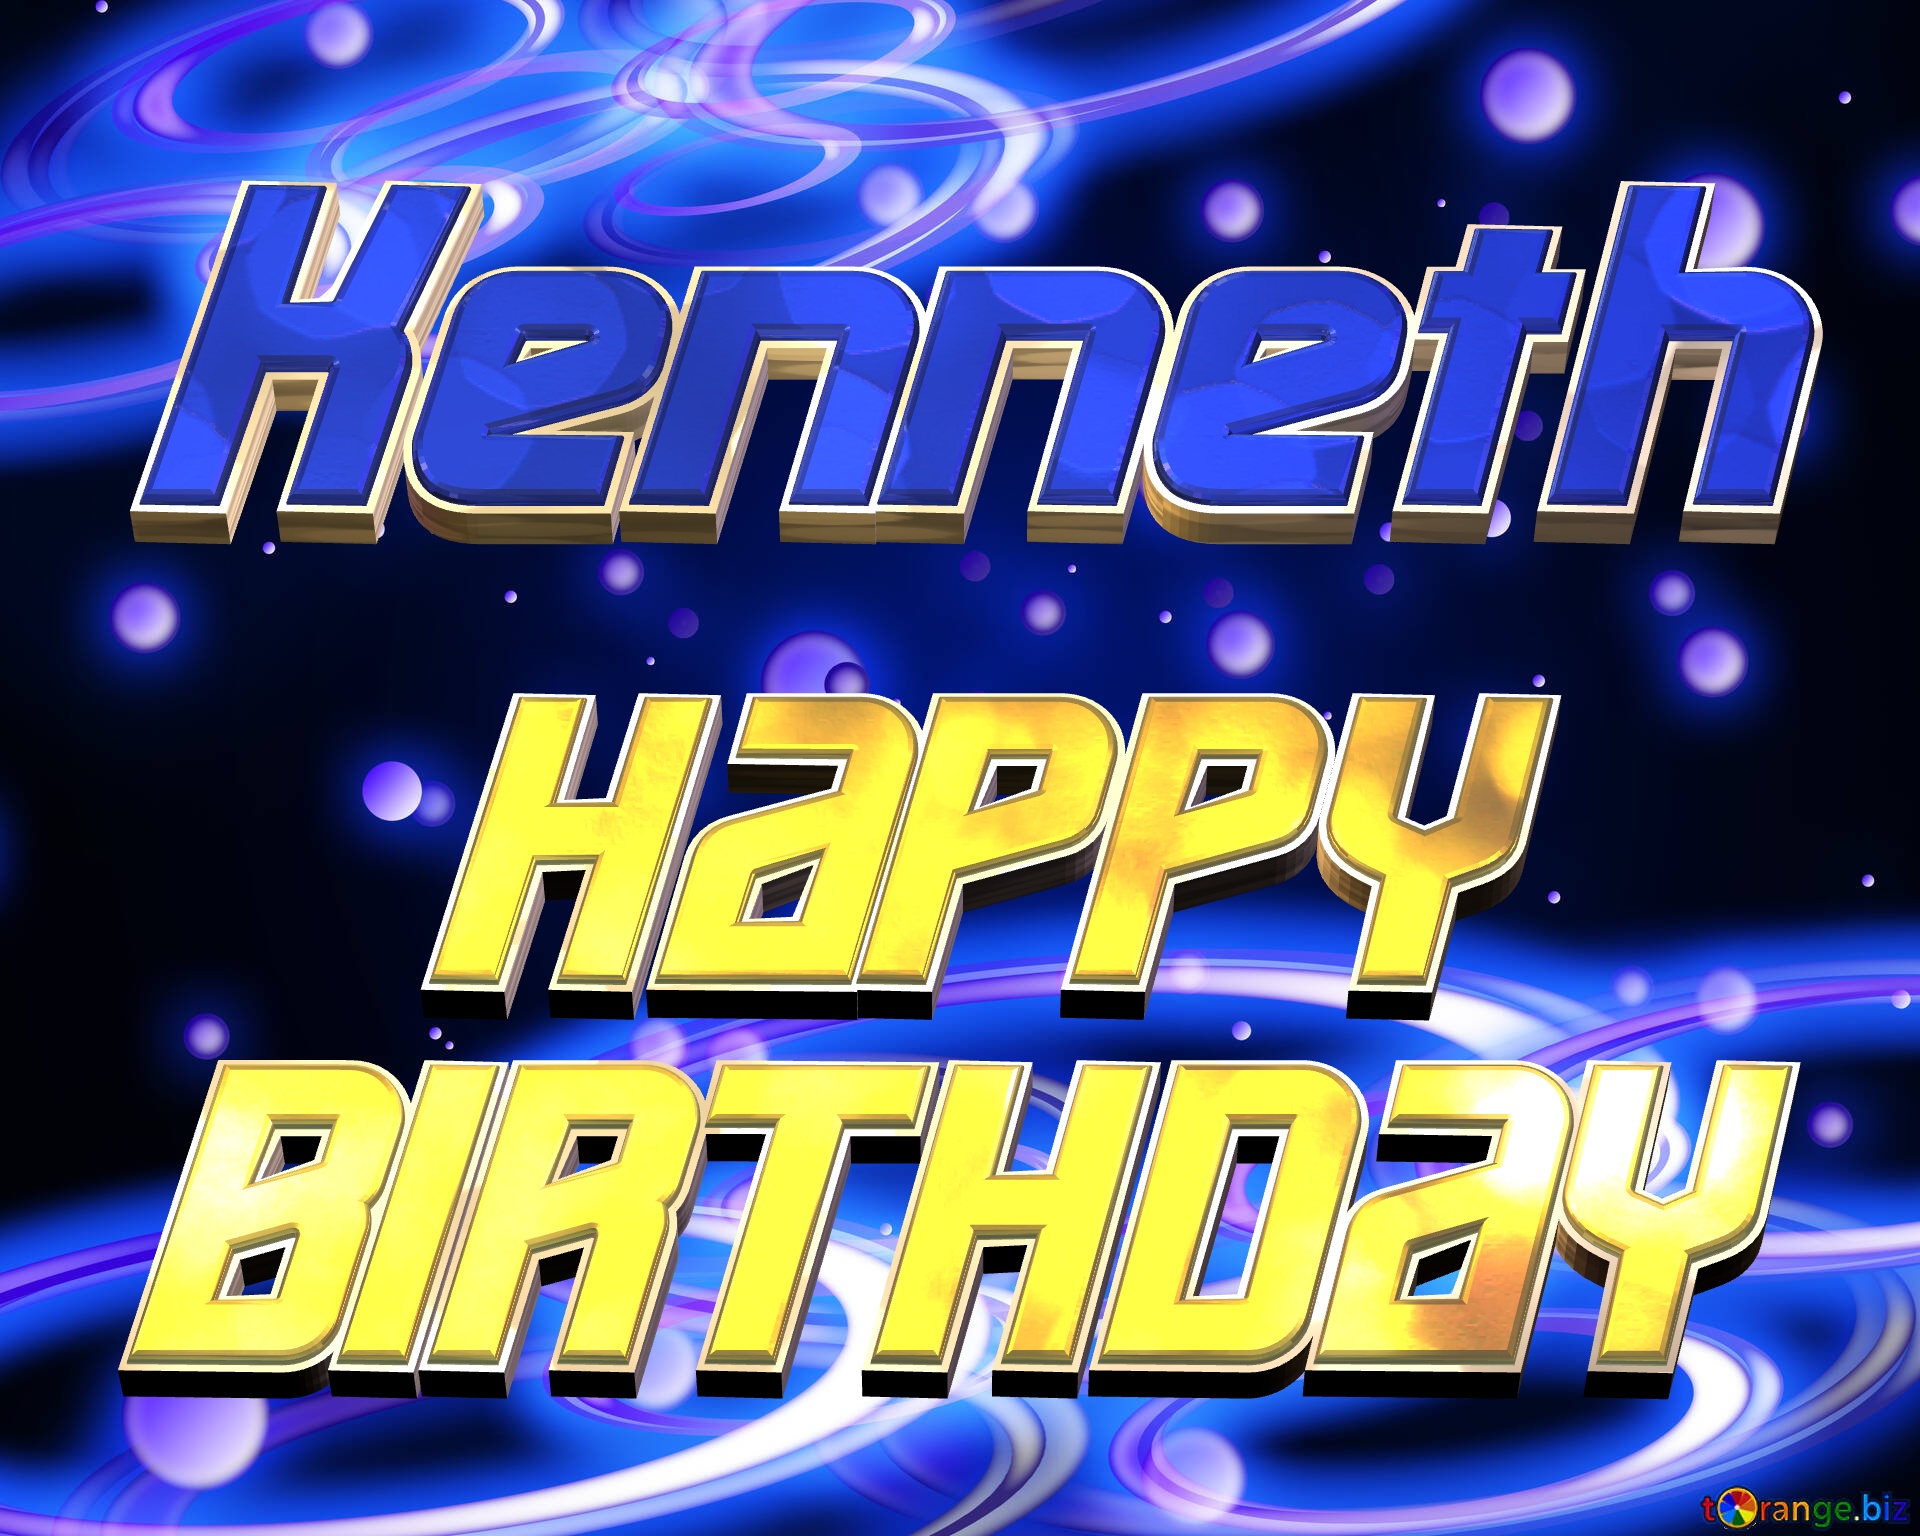 Kenneth Space Happy Birthday! Technology background №54919